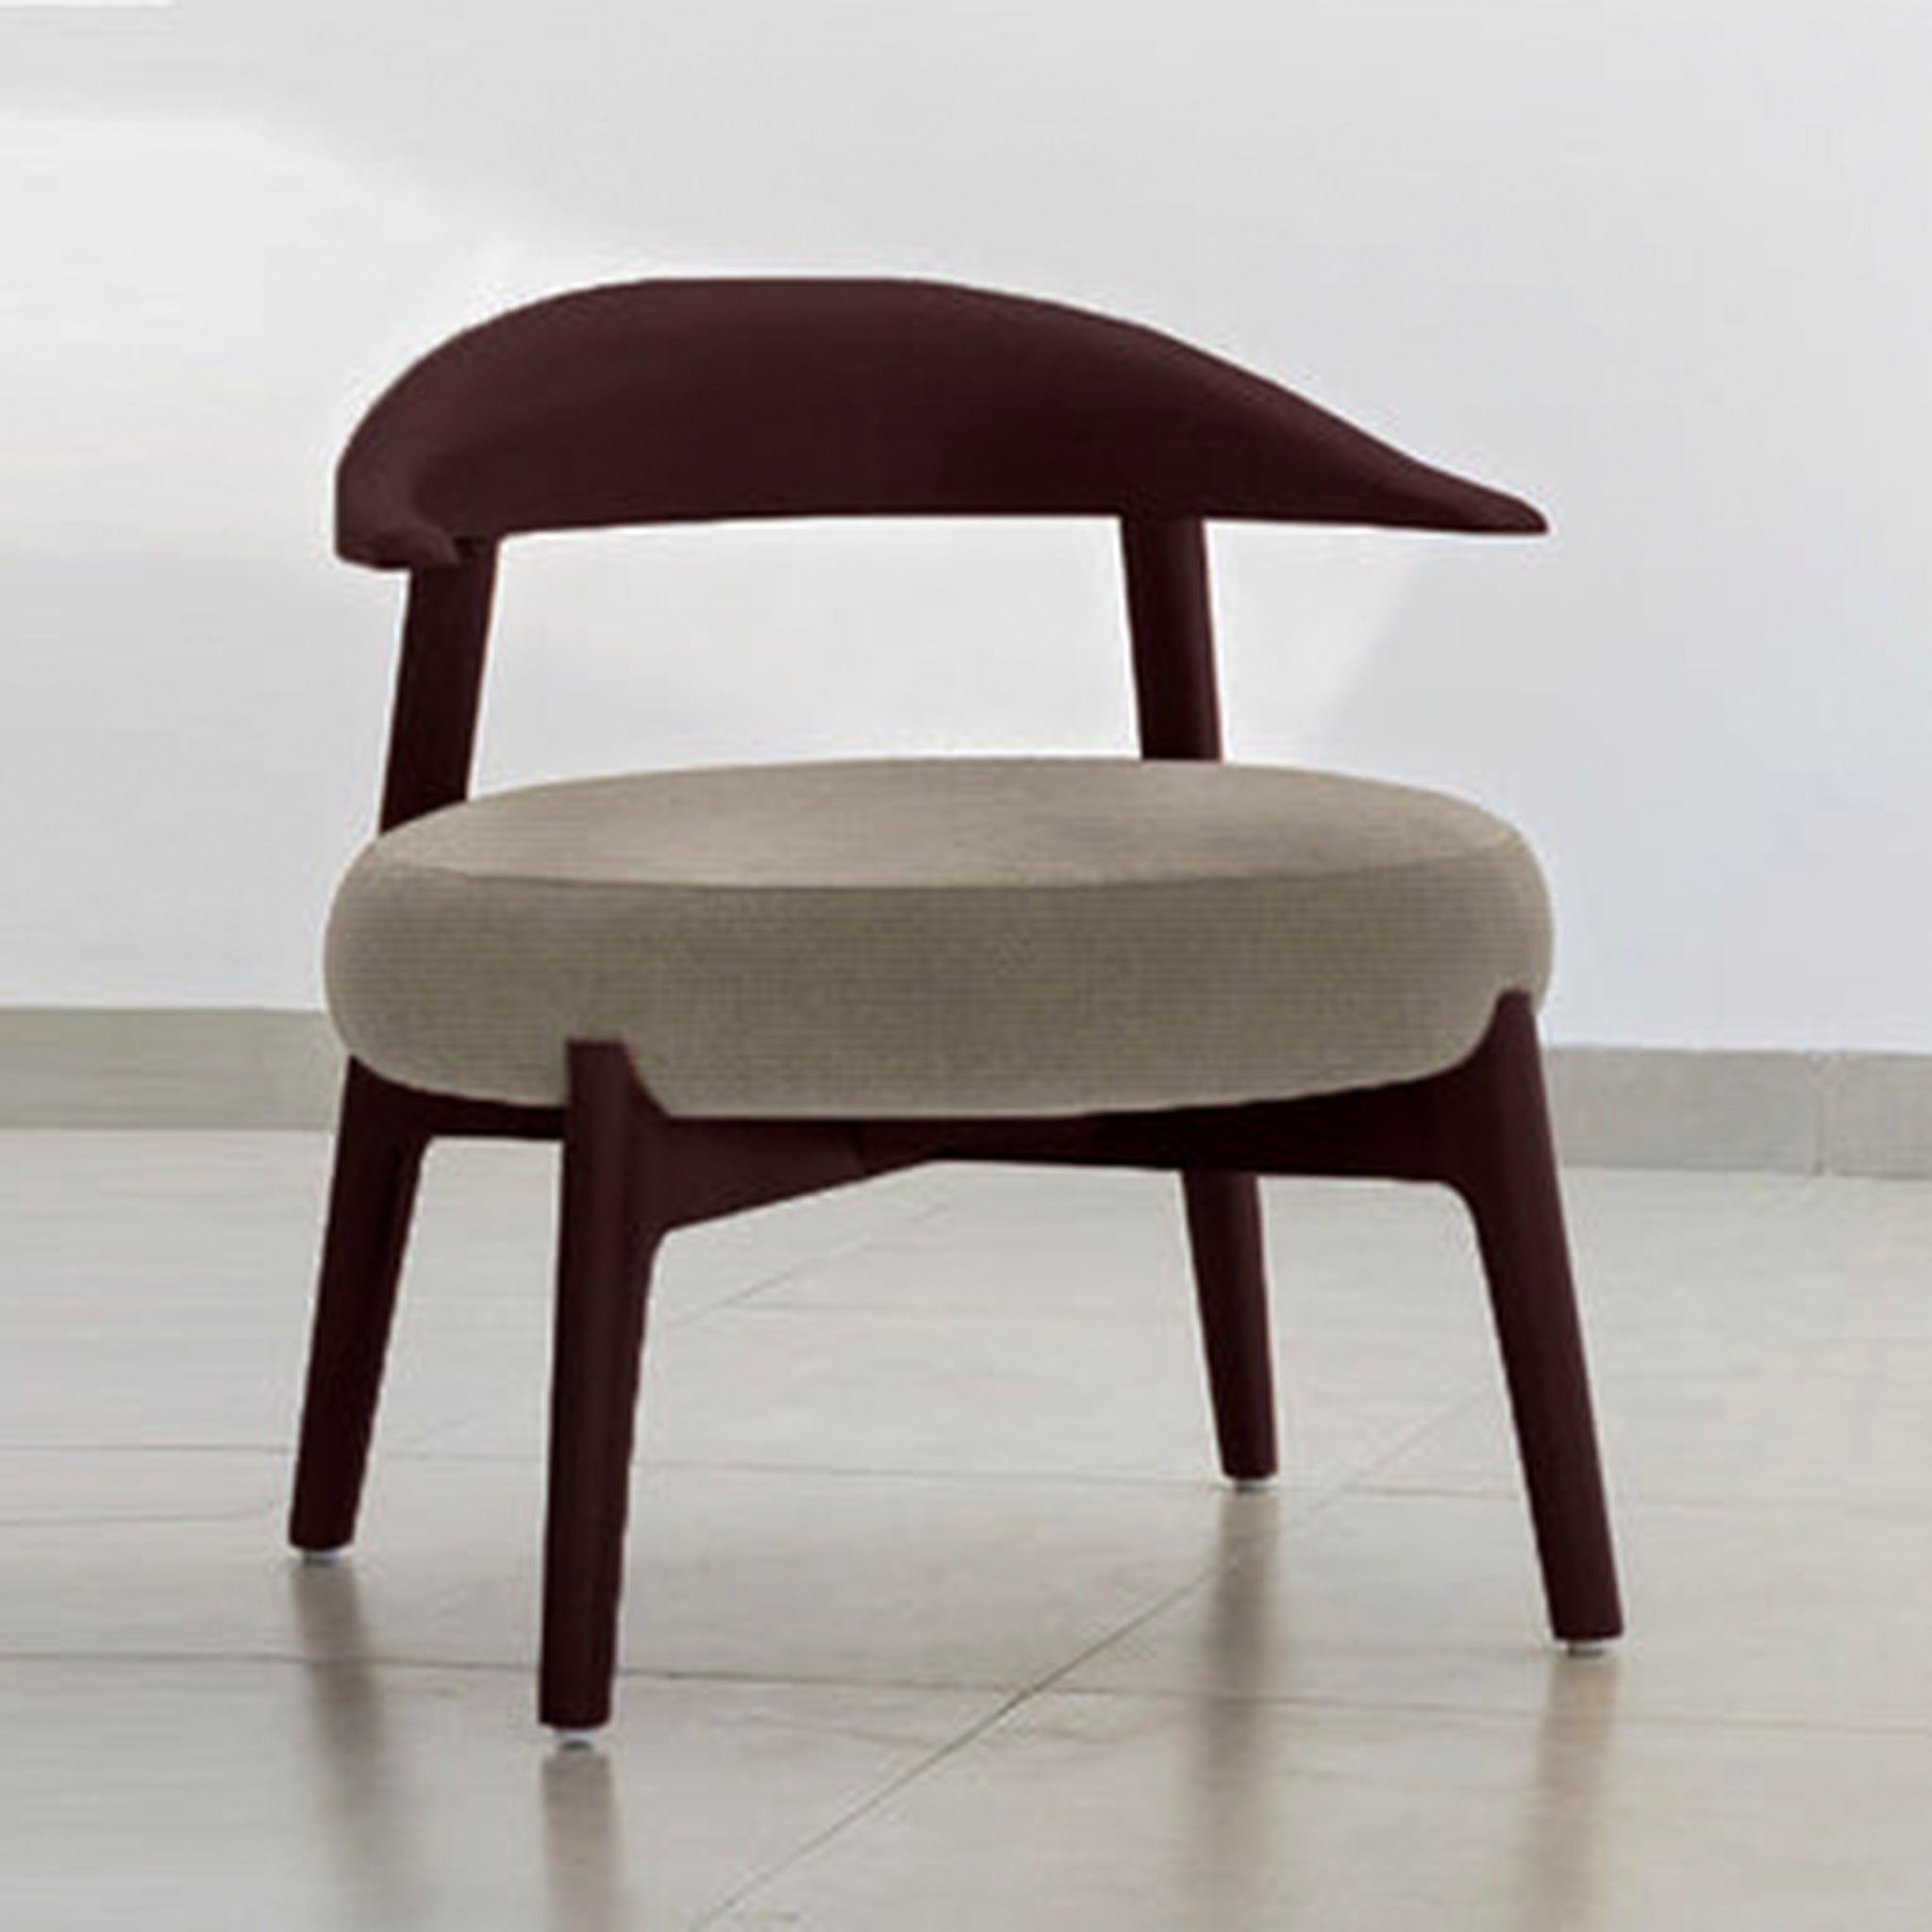 "The Hyde Accent Chair with elegant wooden backrest and plush cushioning"